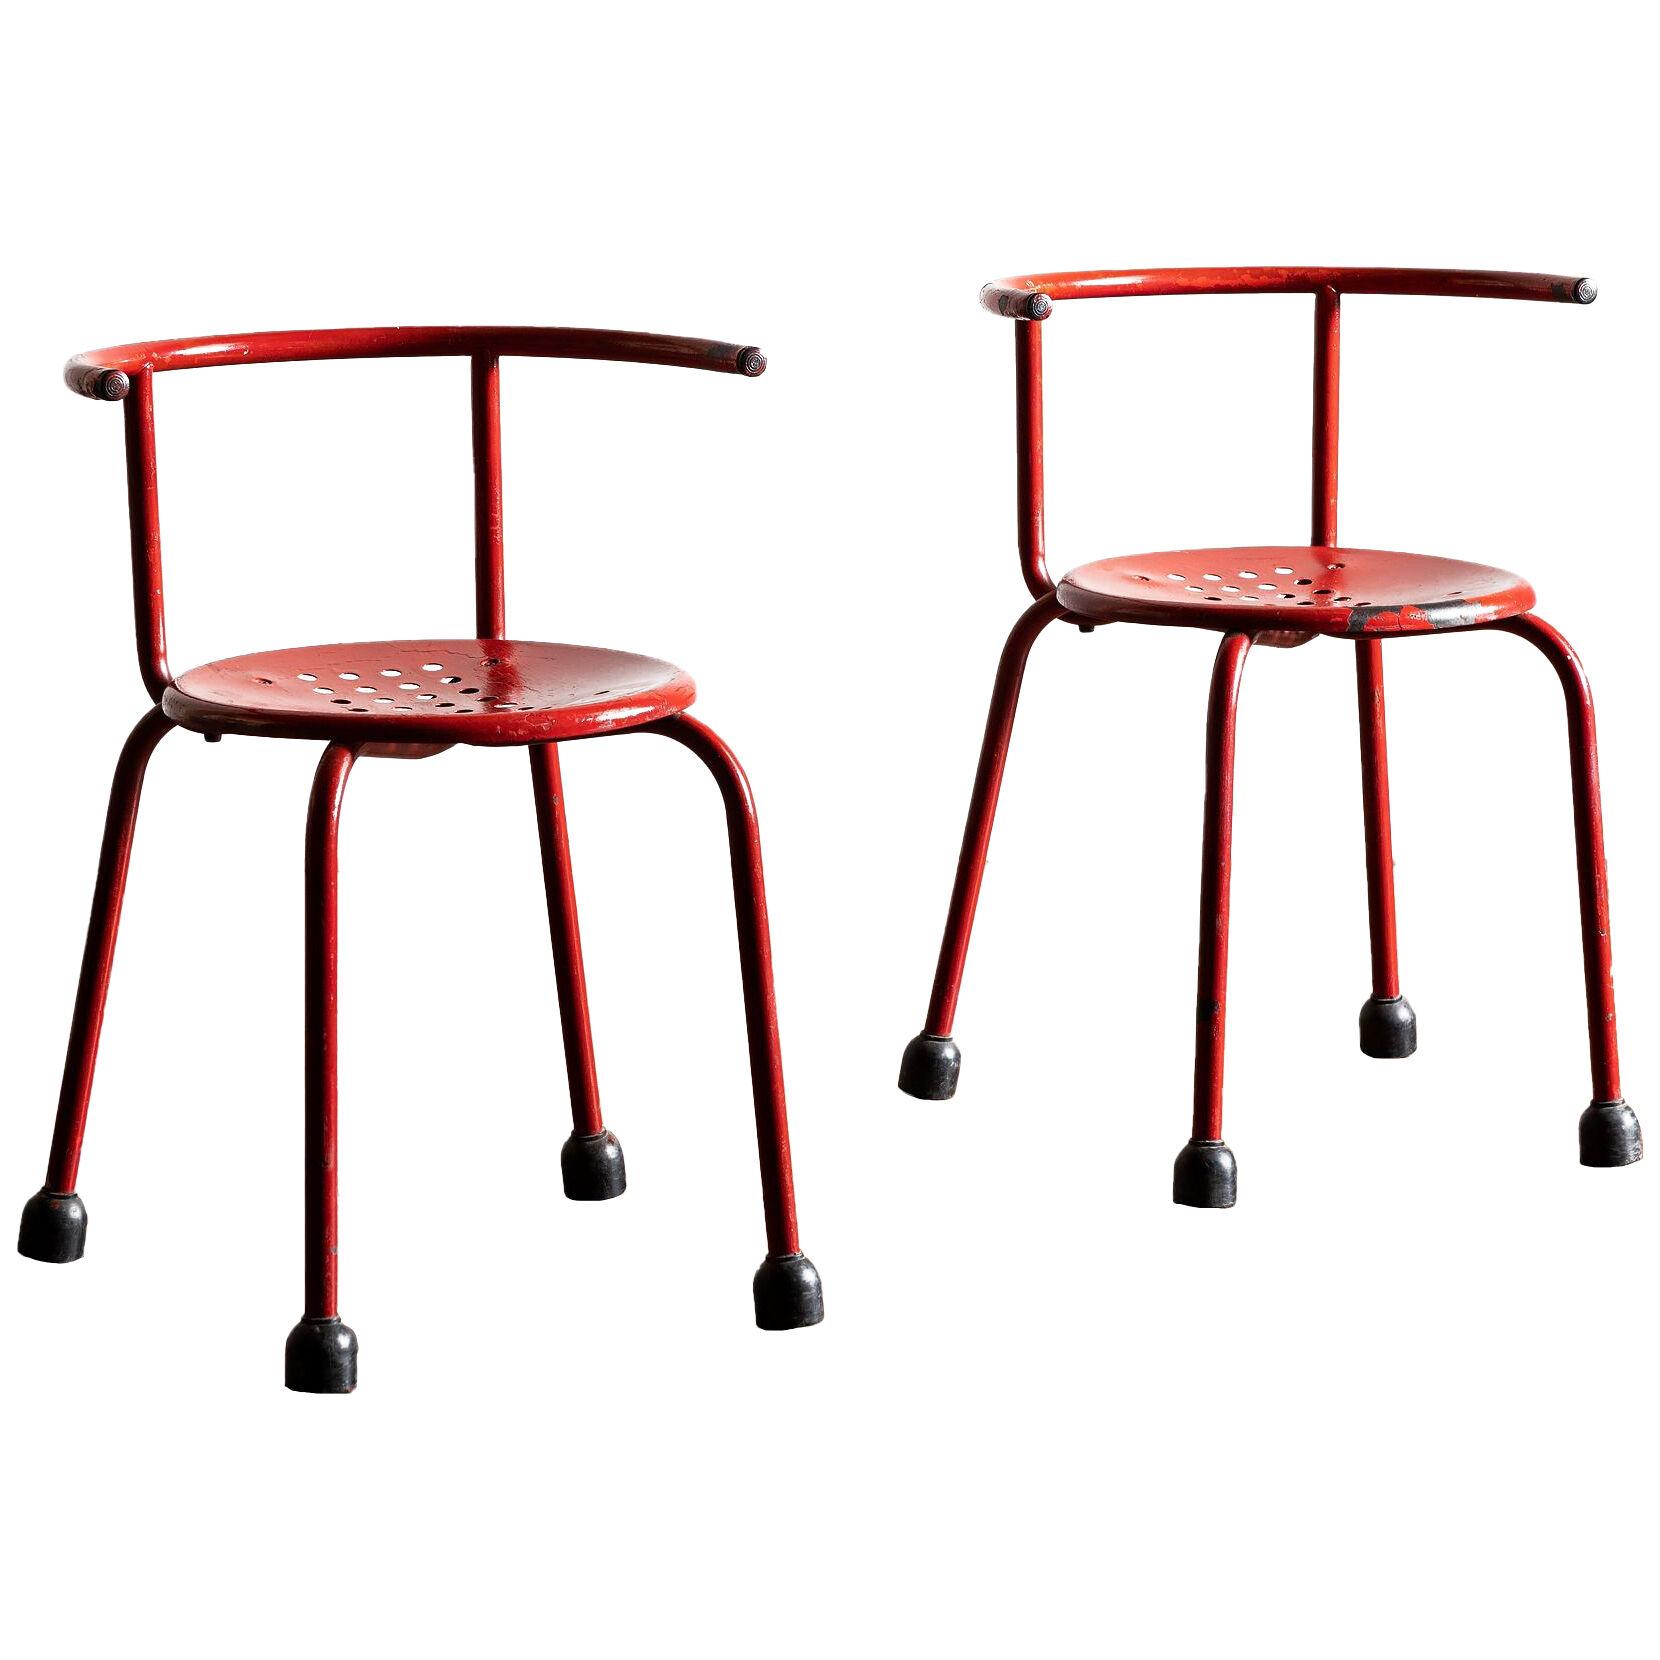 Pair of Red Iron Chairs by Ettore Sottsass, Italy, 1960s